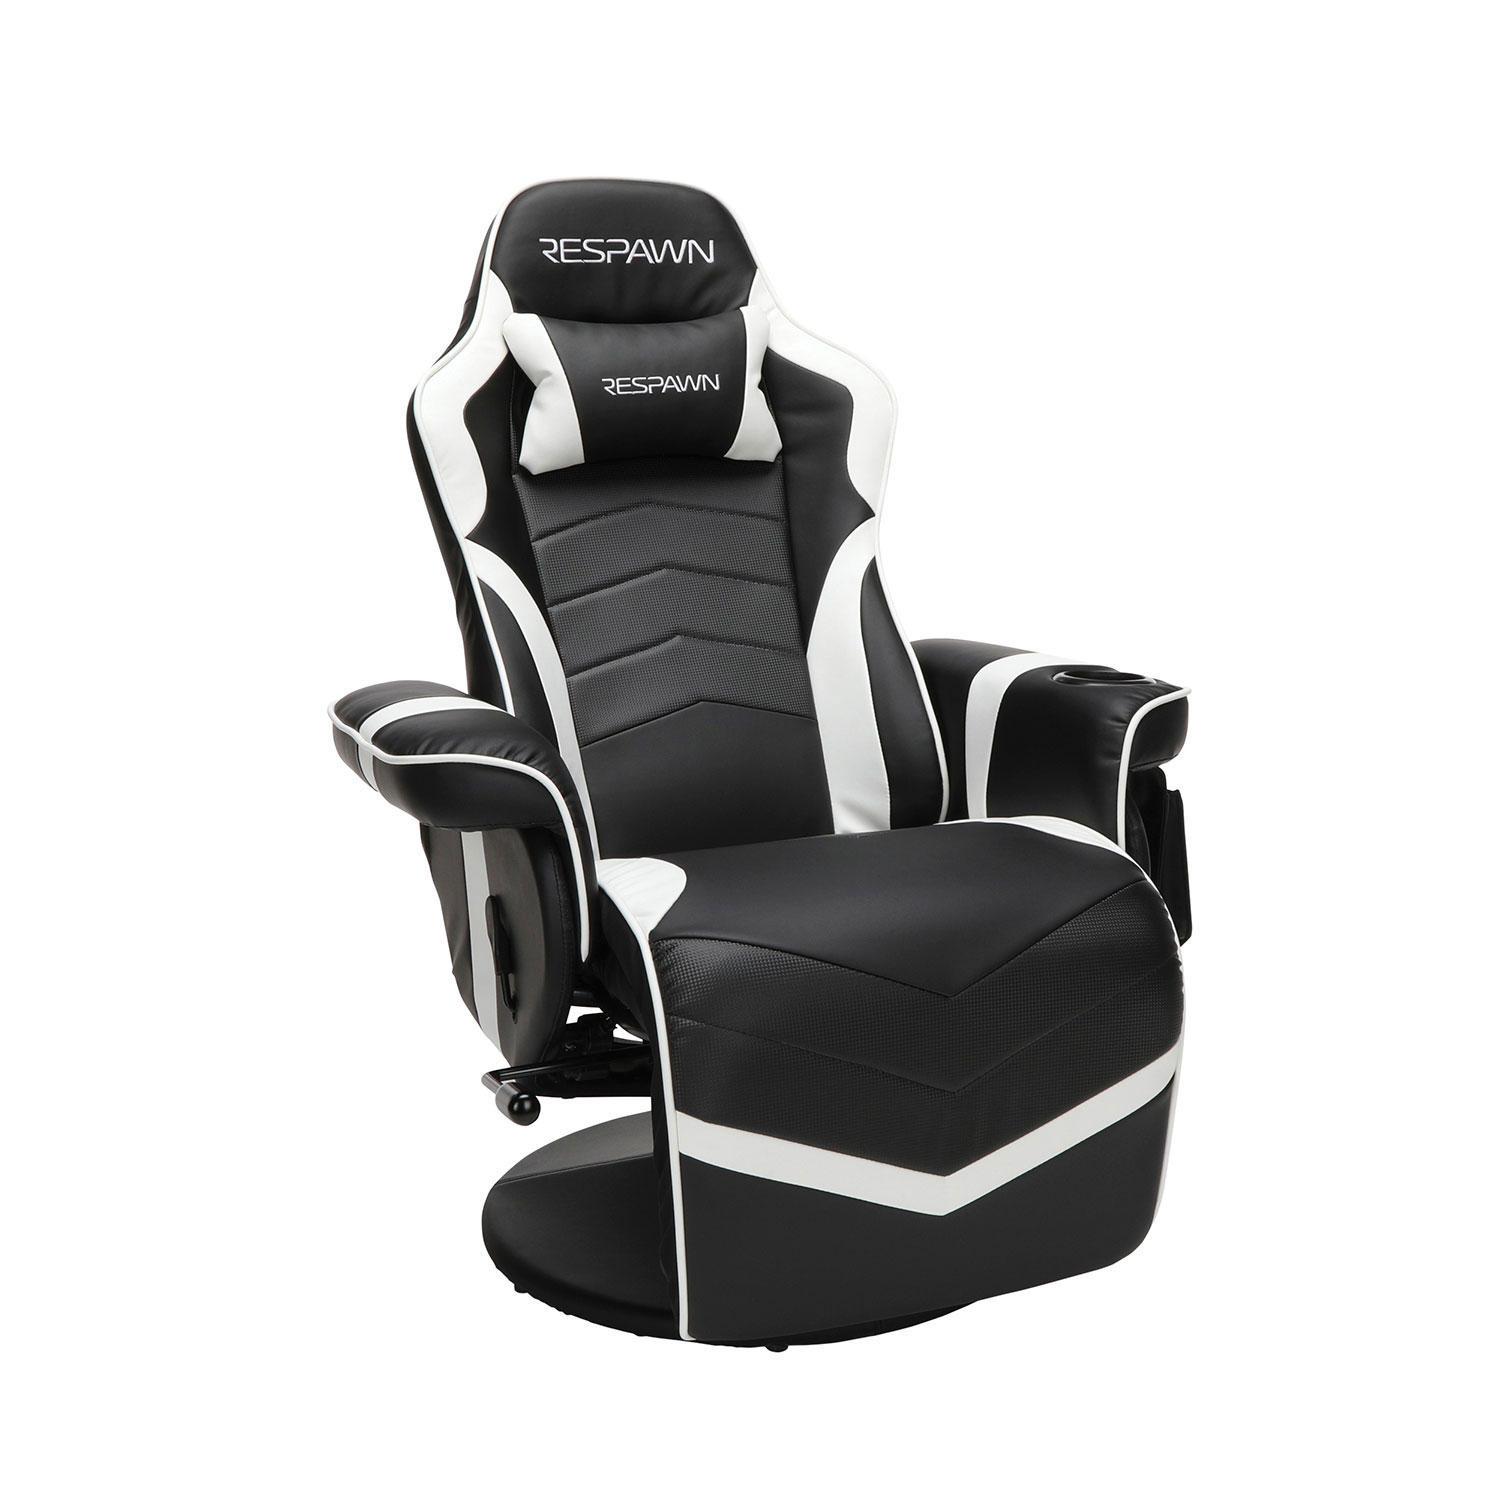 RESPAWN-900 Racing Style Reclining Gaming Chair